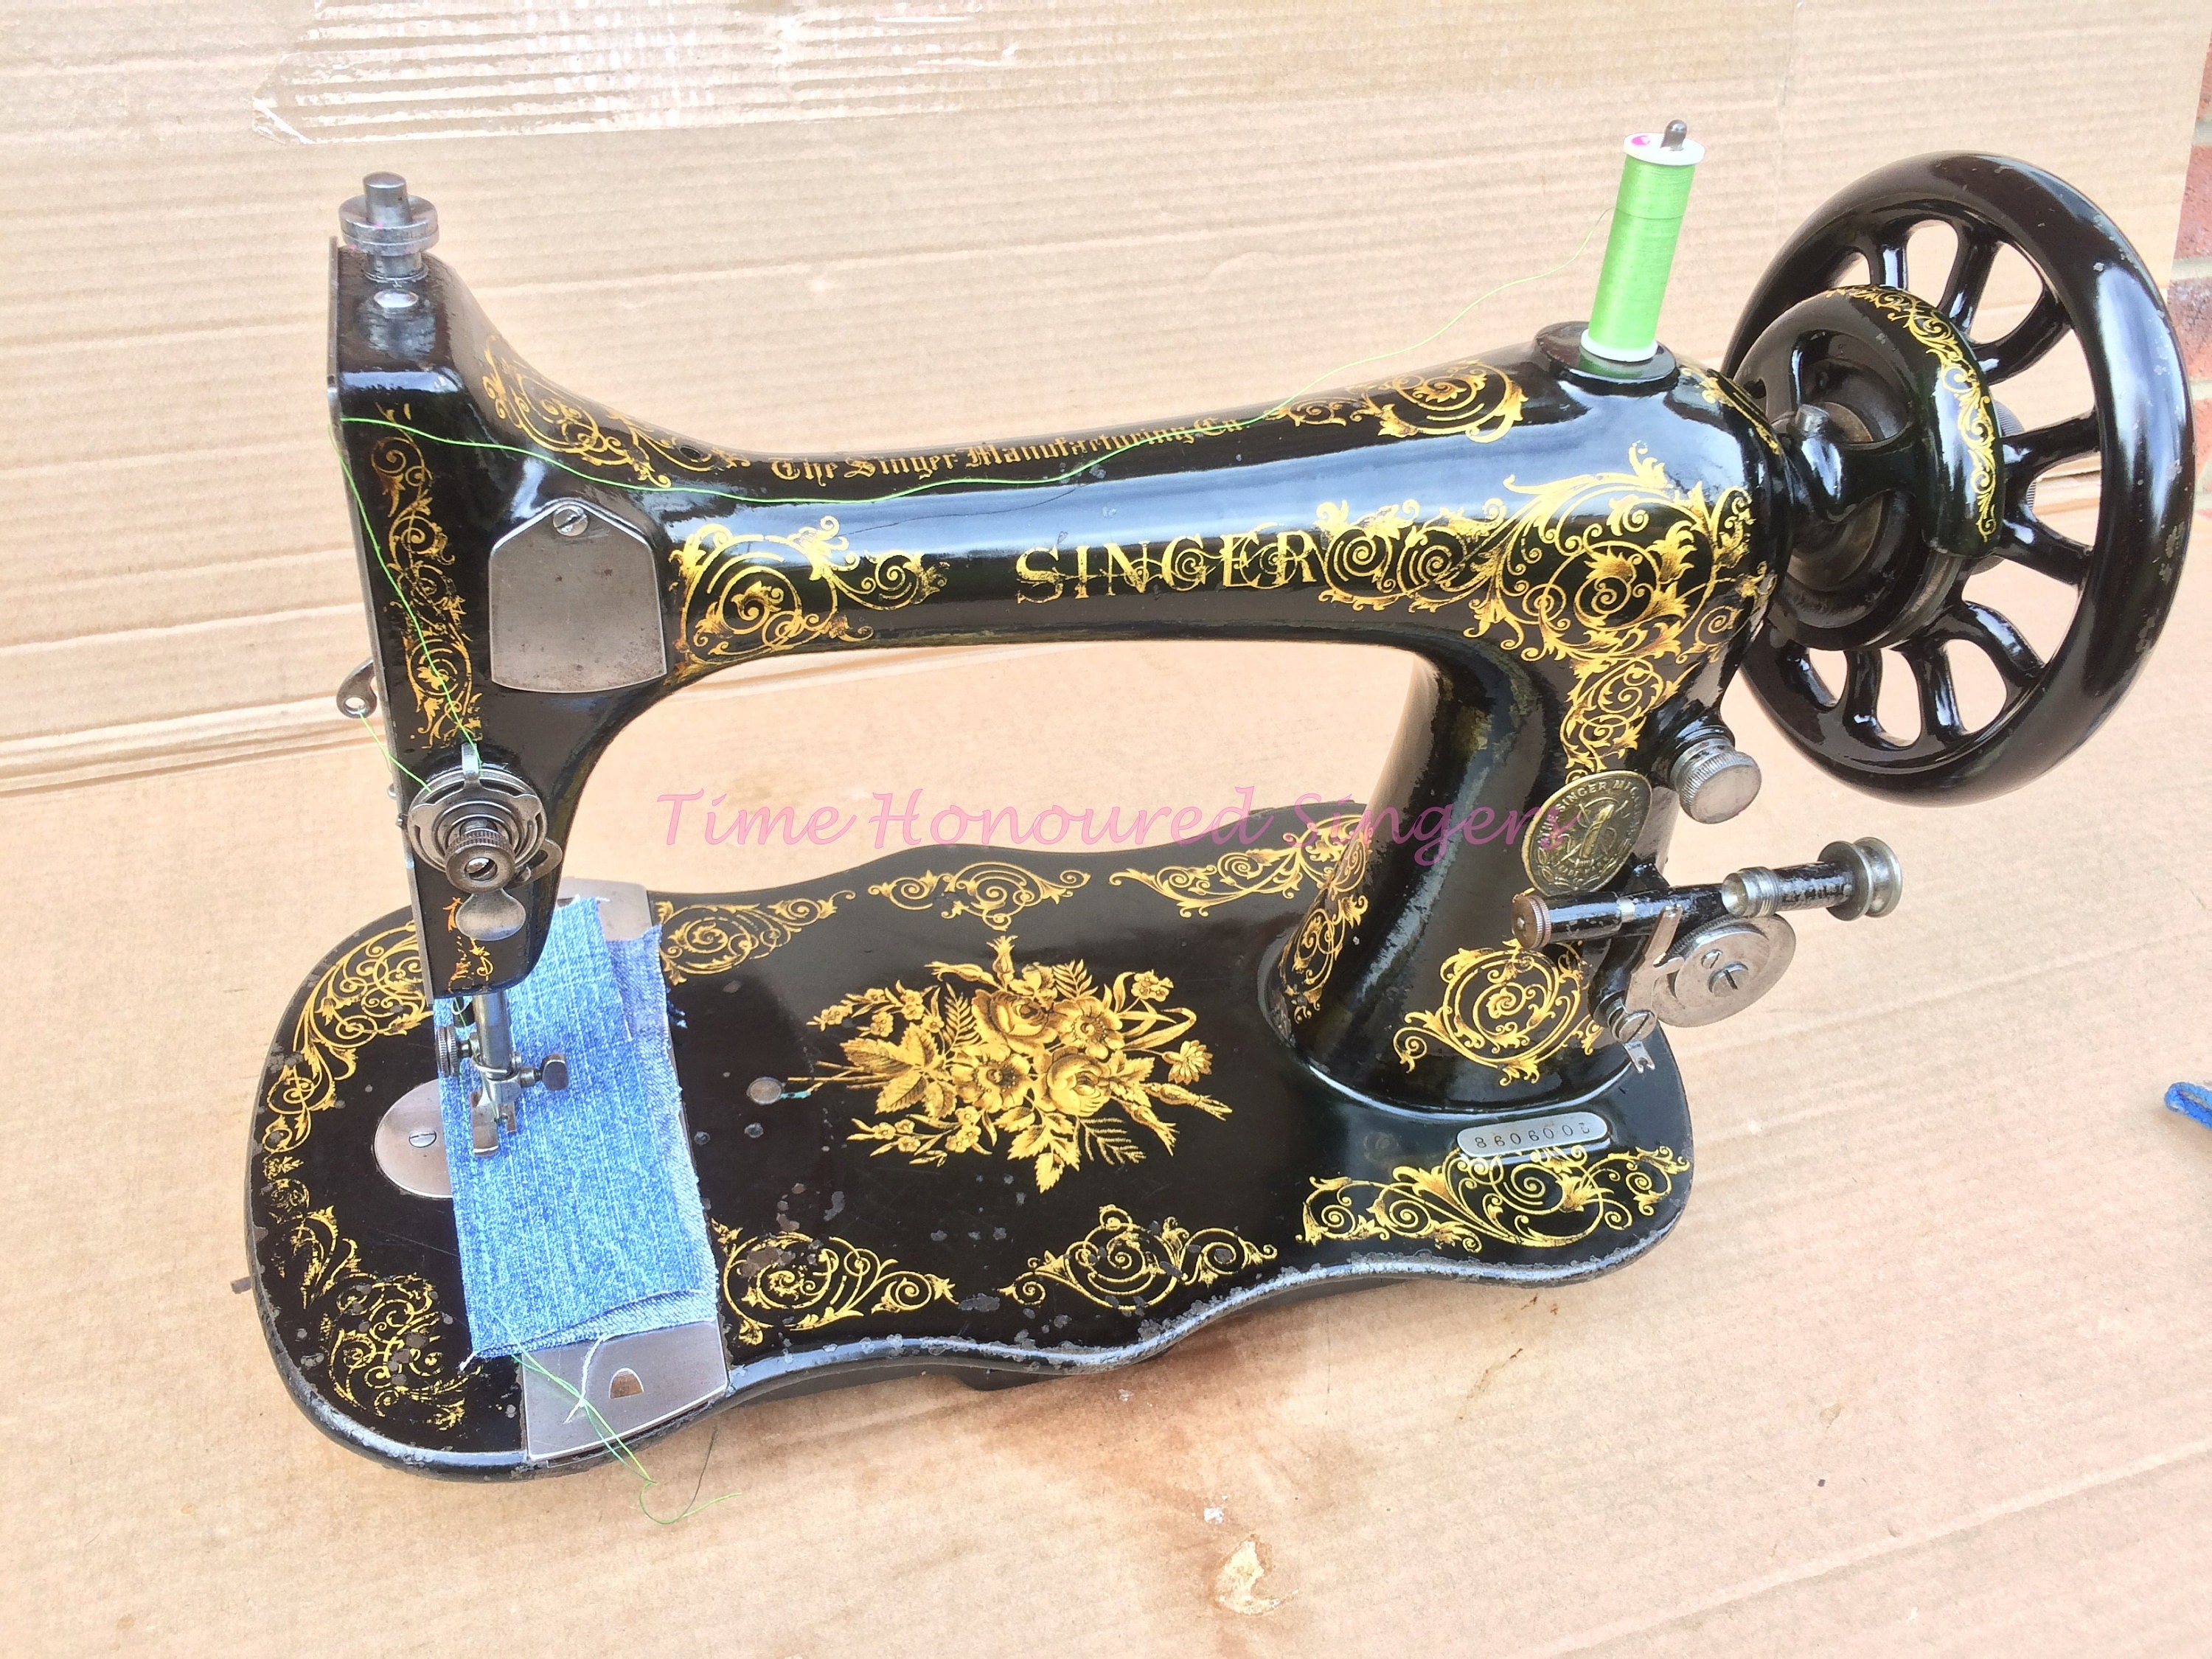 Treadle vs Electric Sewing Machines: Which Is Better? #SewingMachines  #VintageSewing #Singer27 